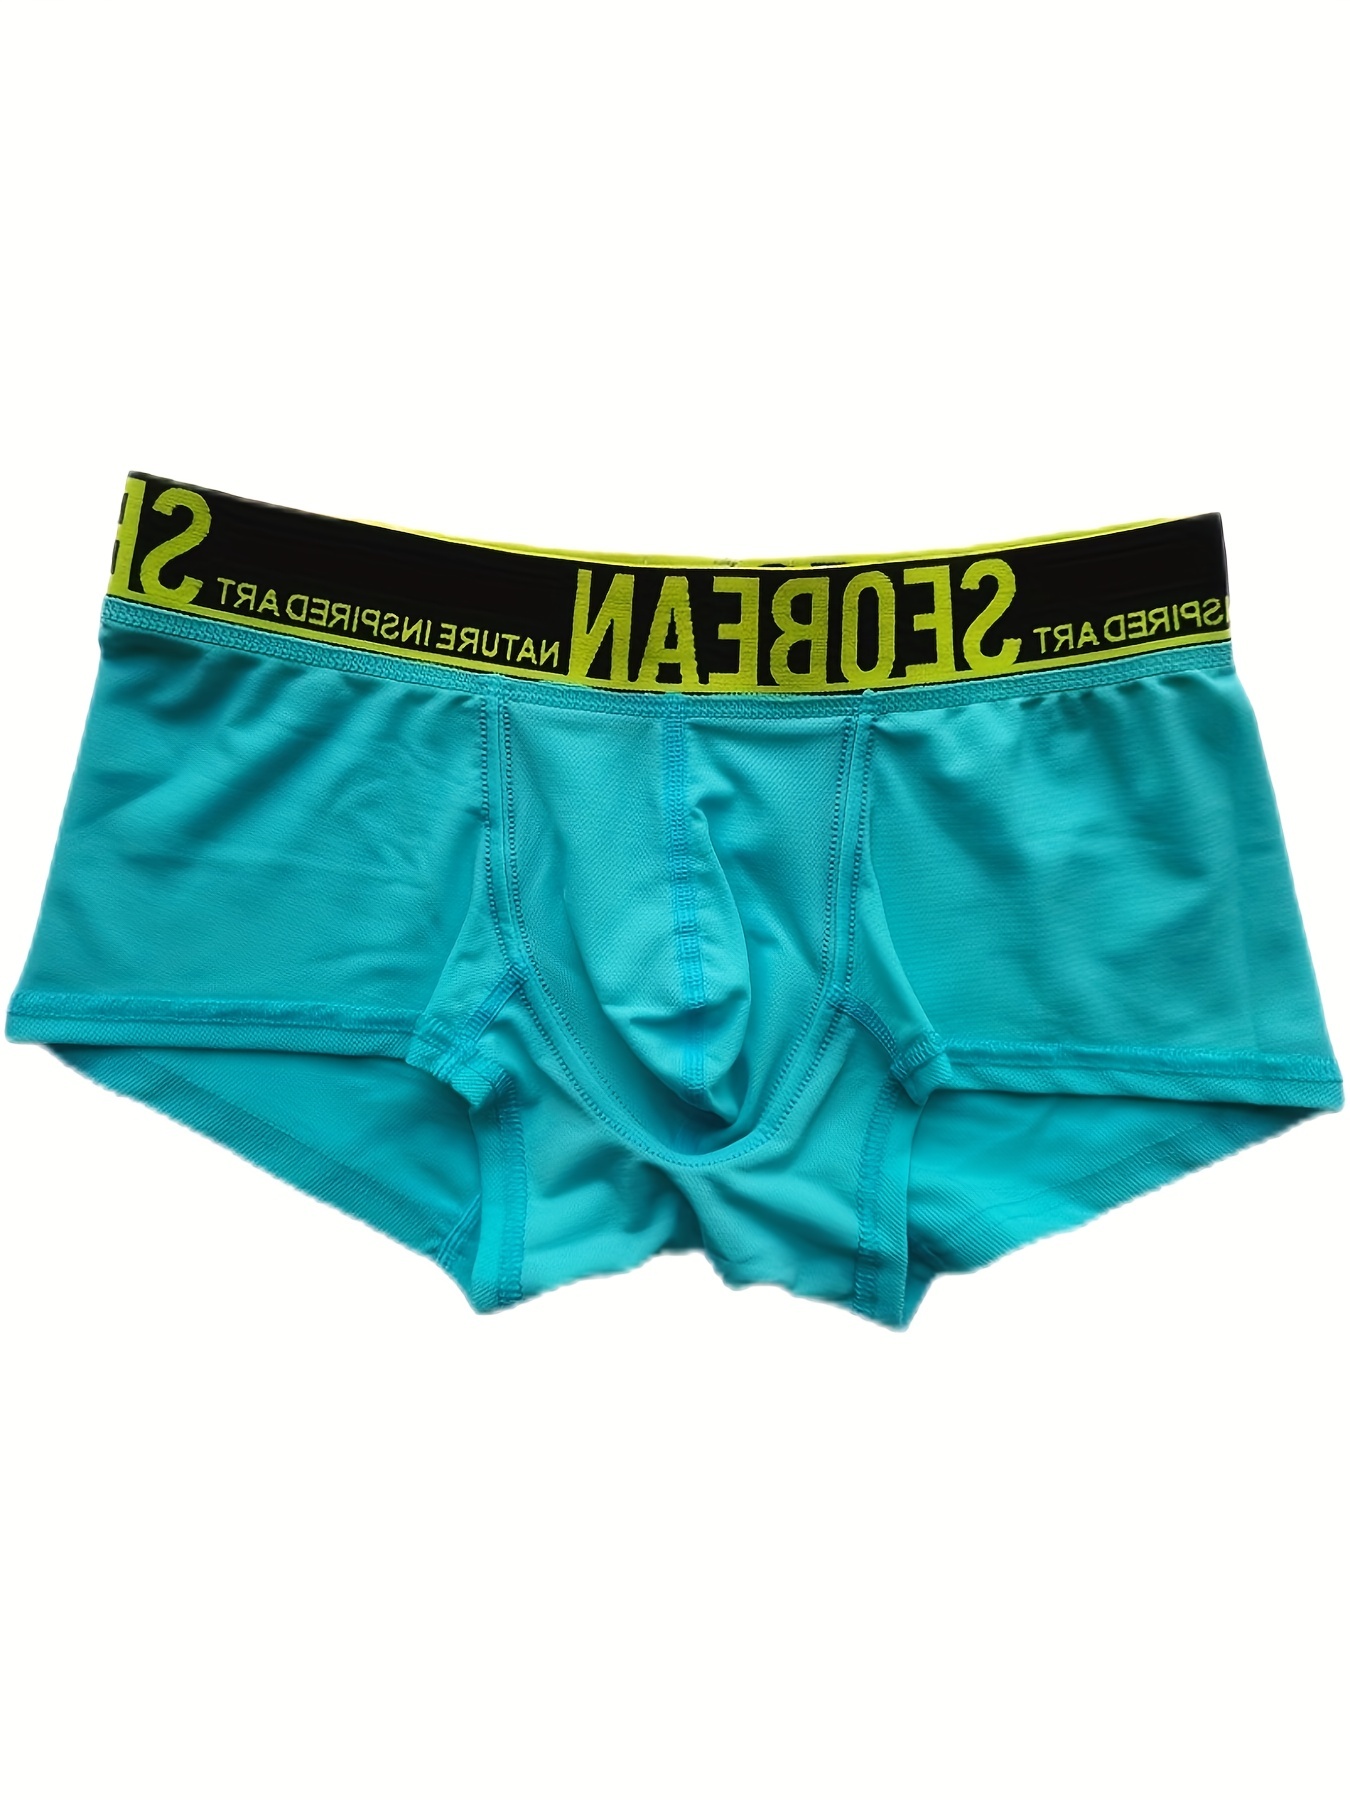 Mens Cotton  Mens Briefs With U Convex Pouch Sexy And Comfortable Low  Waist Bikini Underwear From Ohaiiou, $7.91